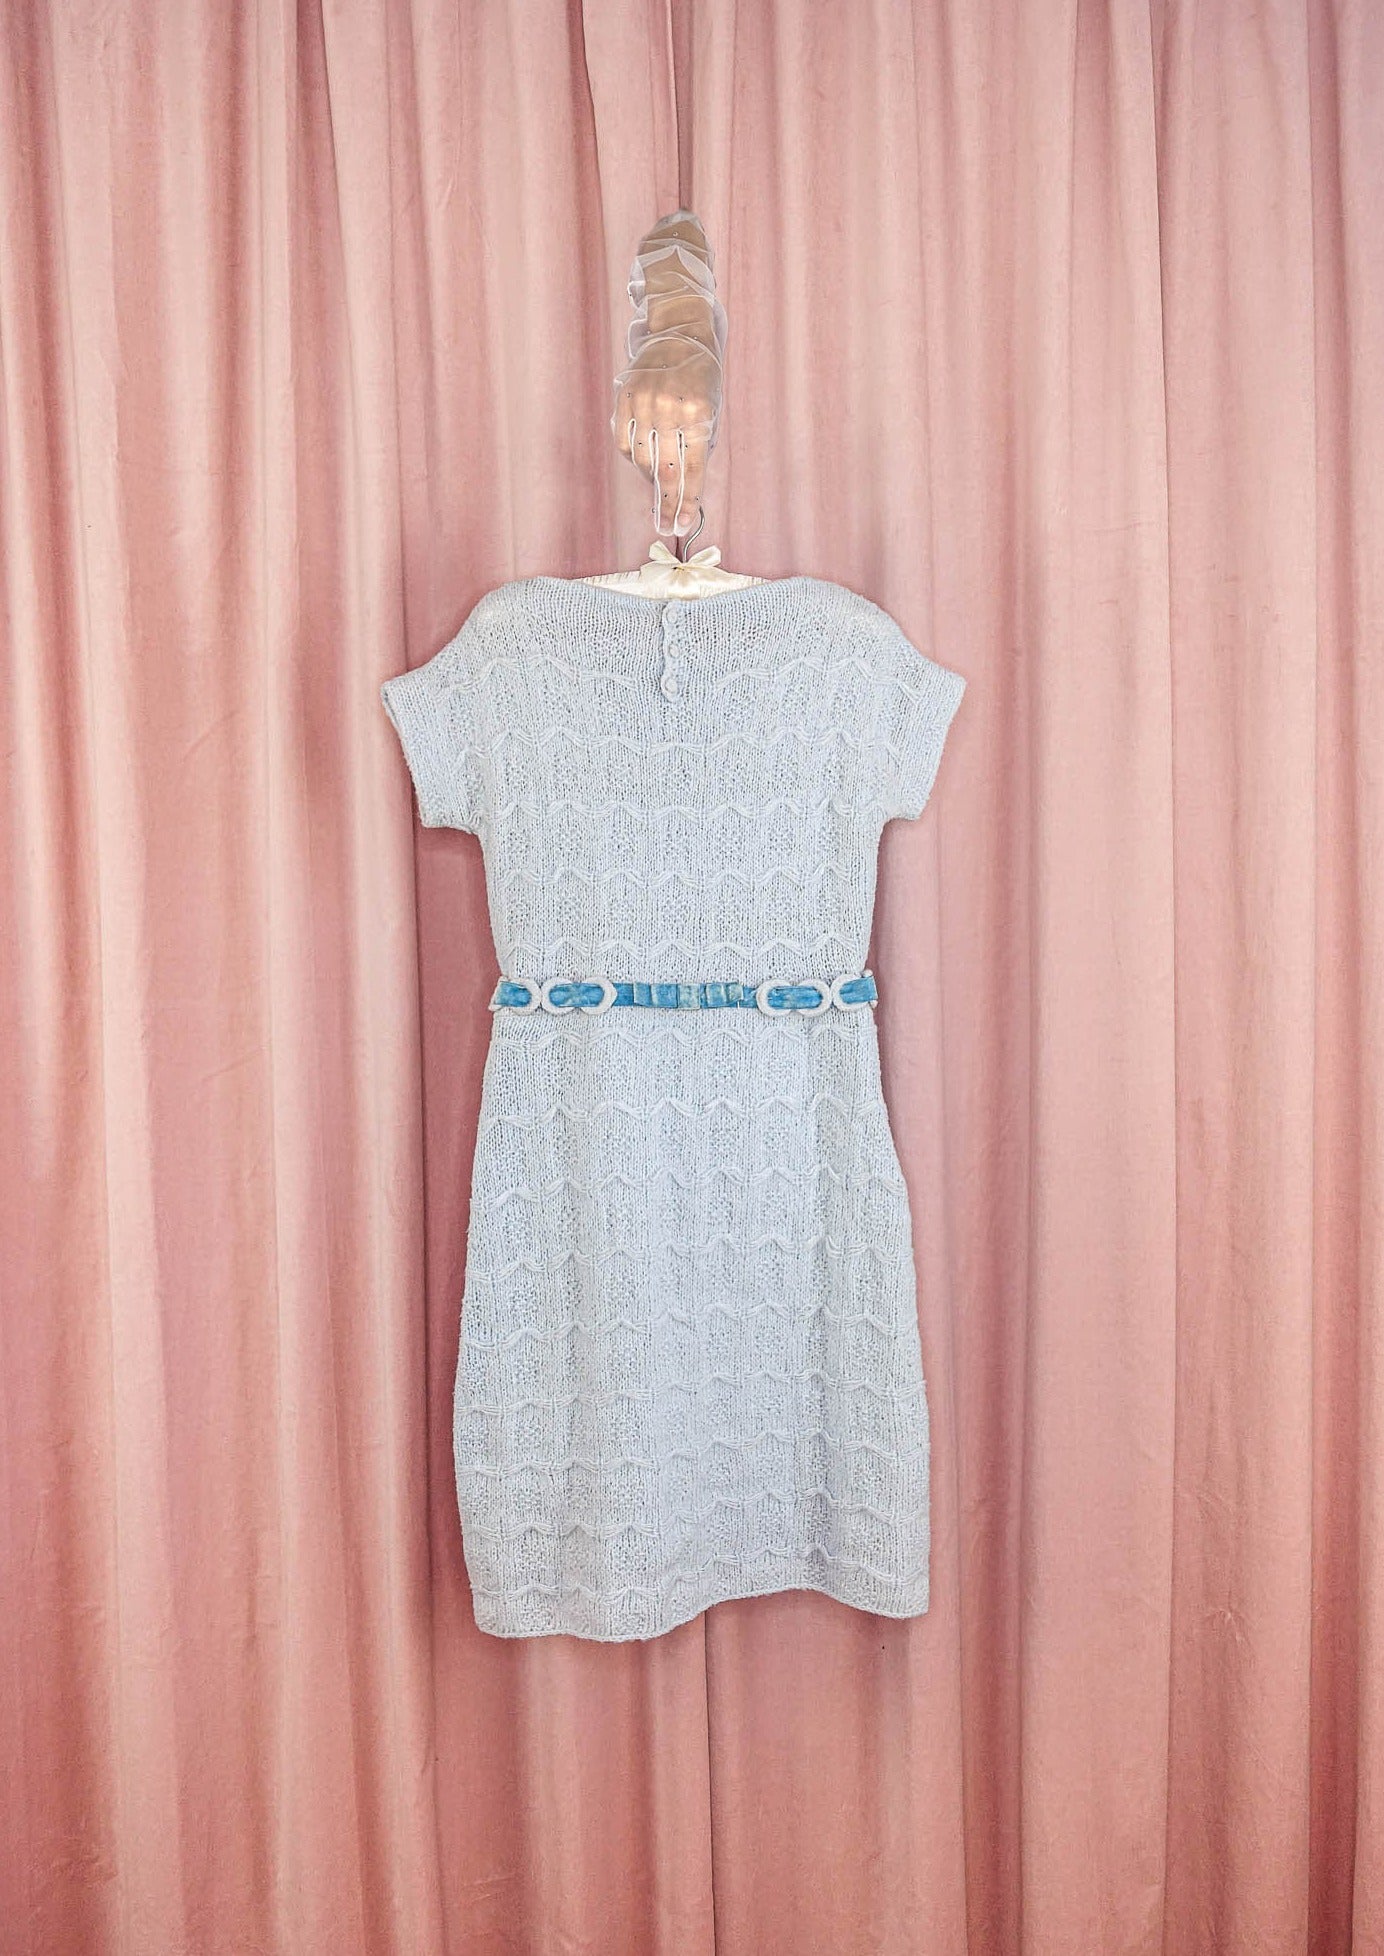 1960s Baby Blue Belted Knit Dress